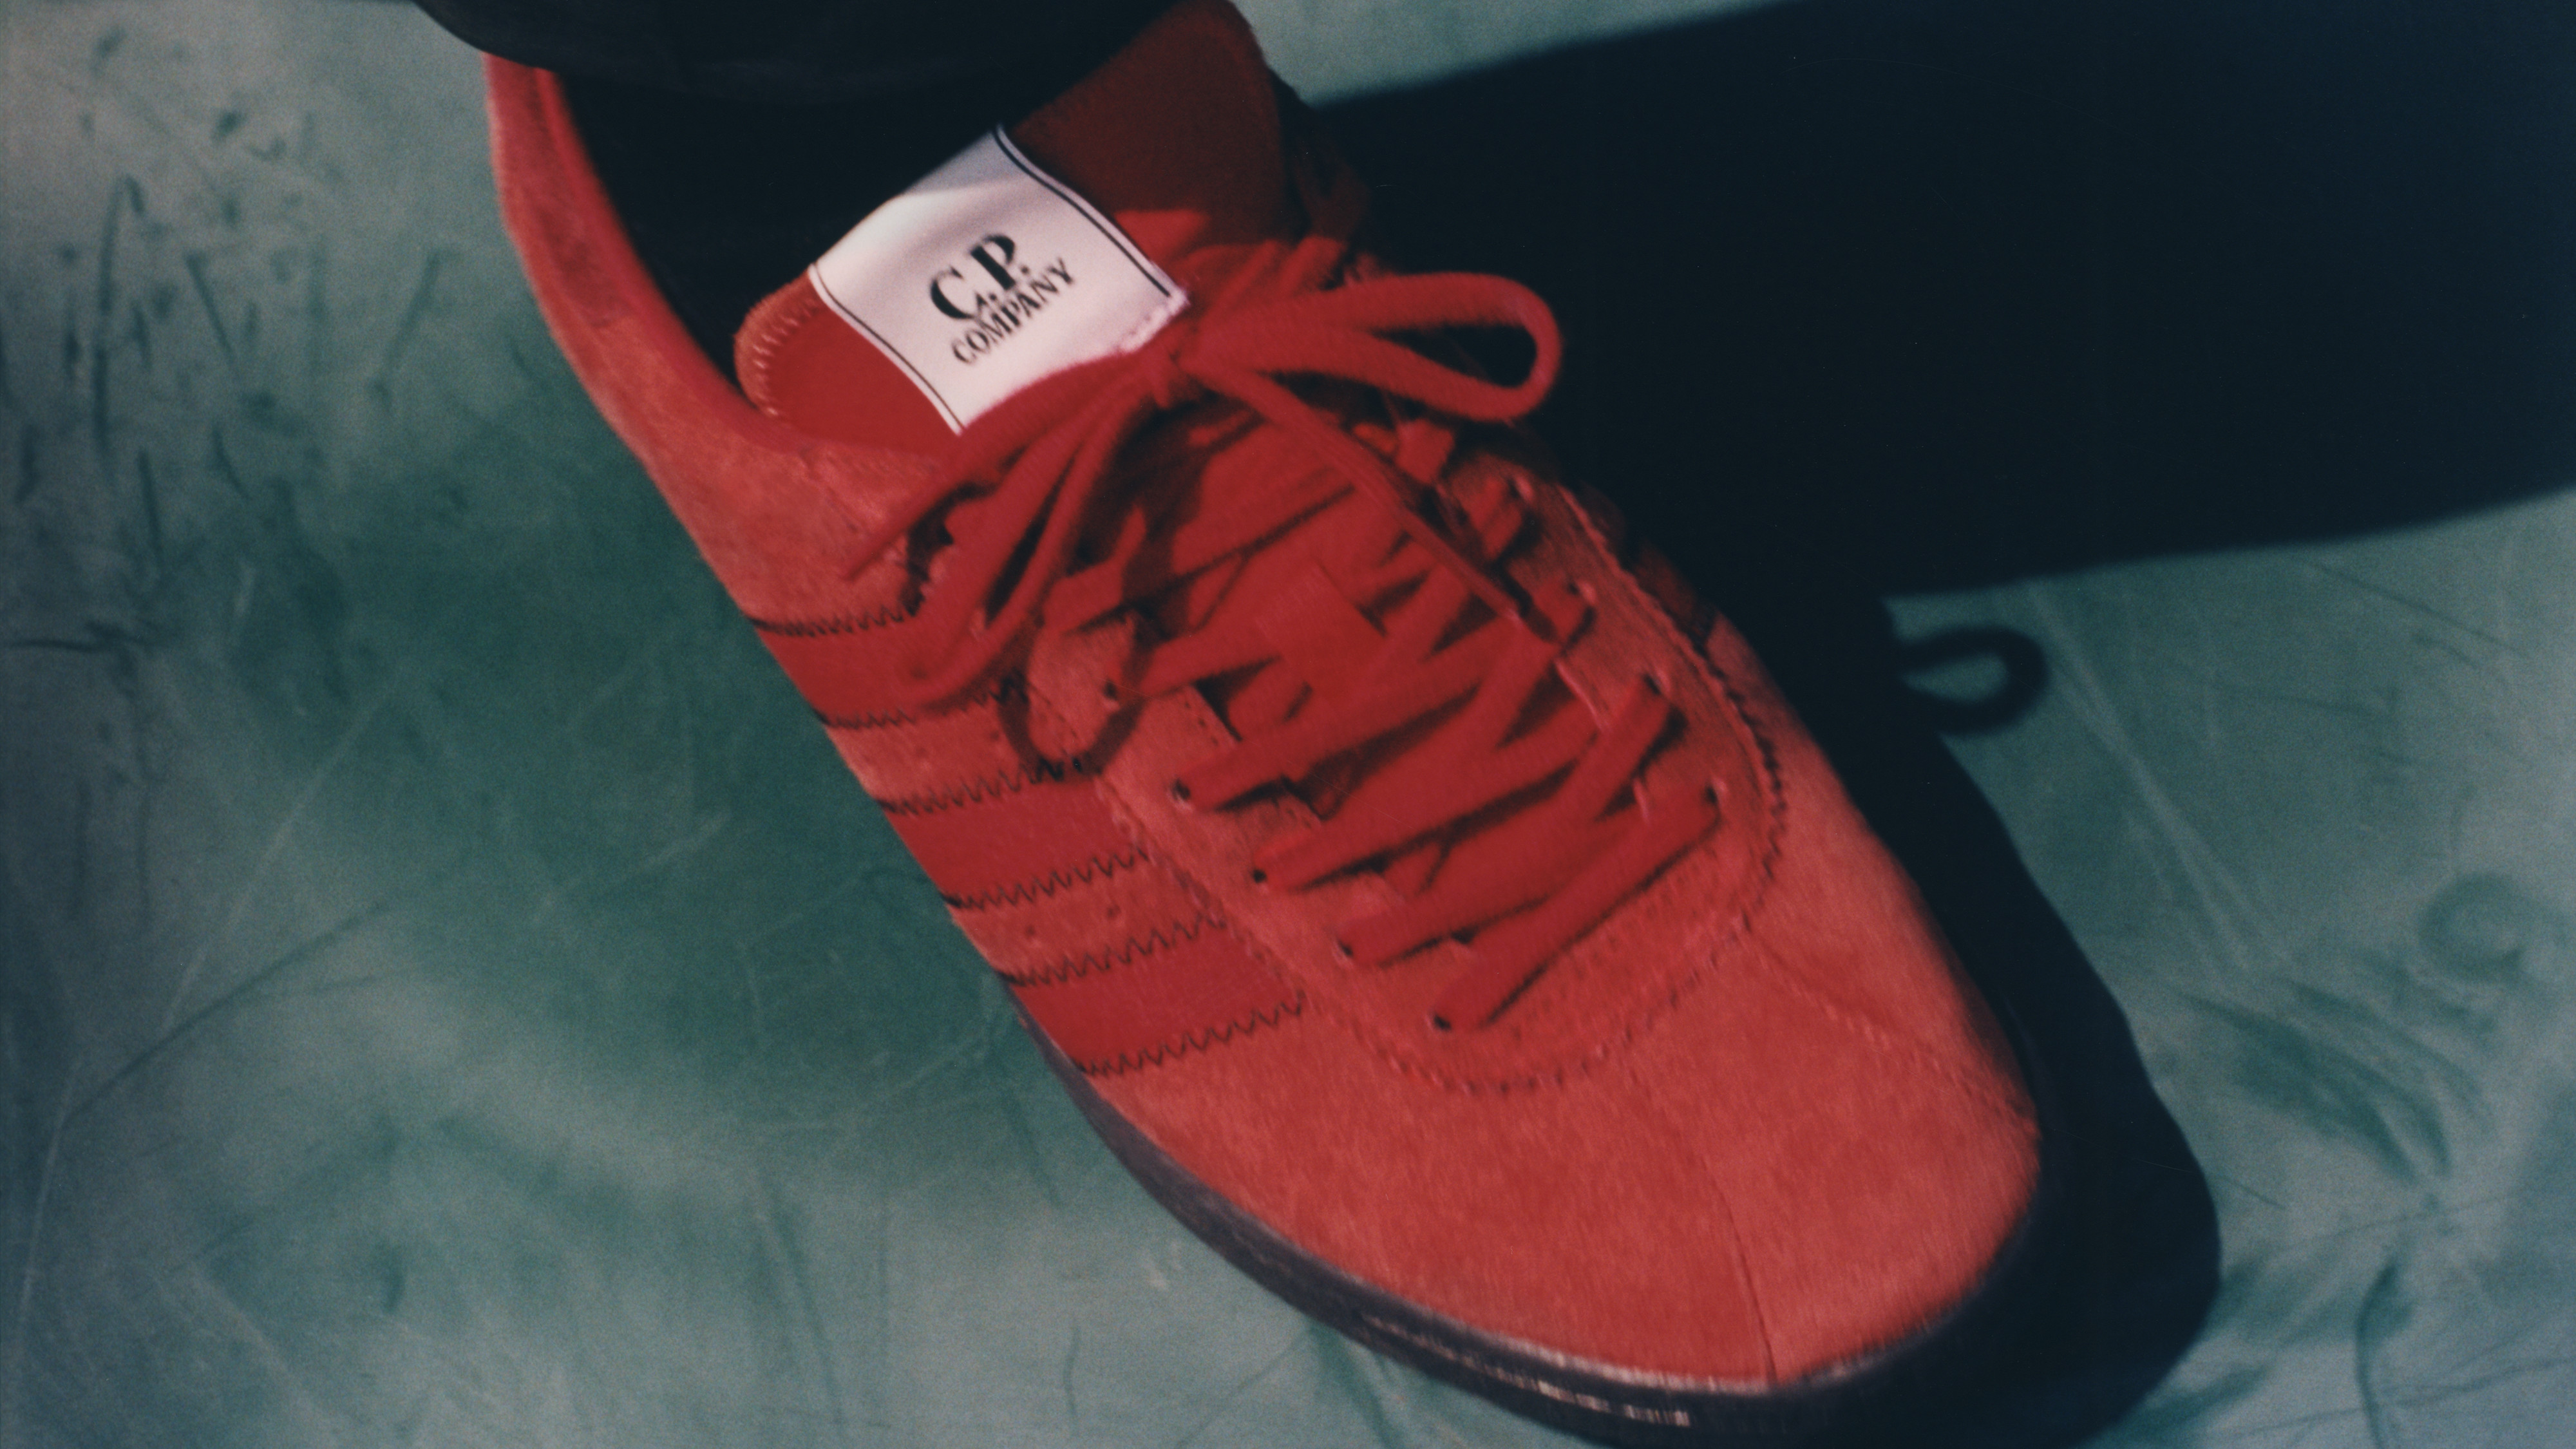 Adidas Originals x C.P. Company Collection Release Date | Sole Collector